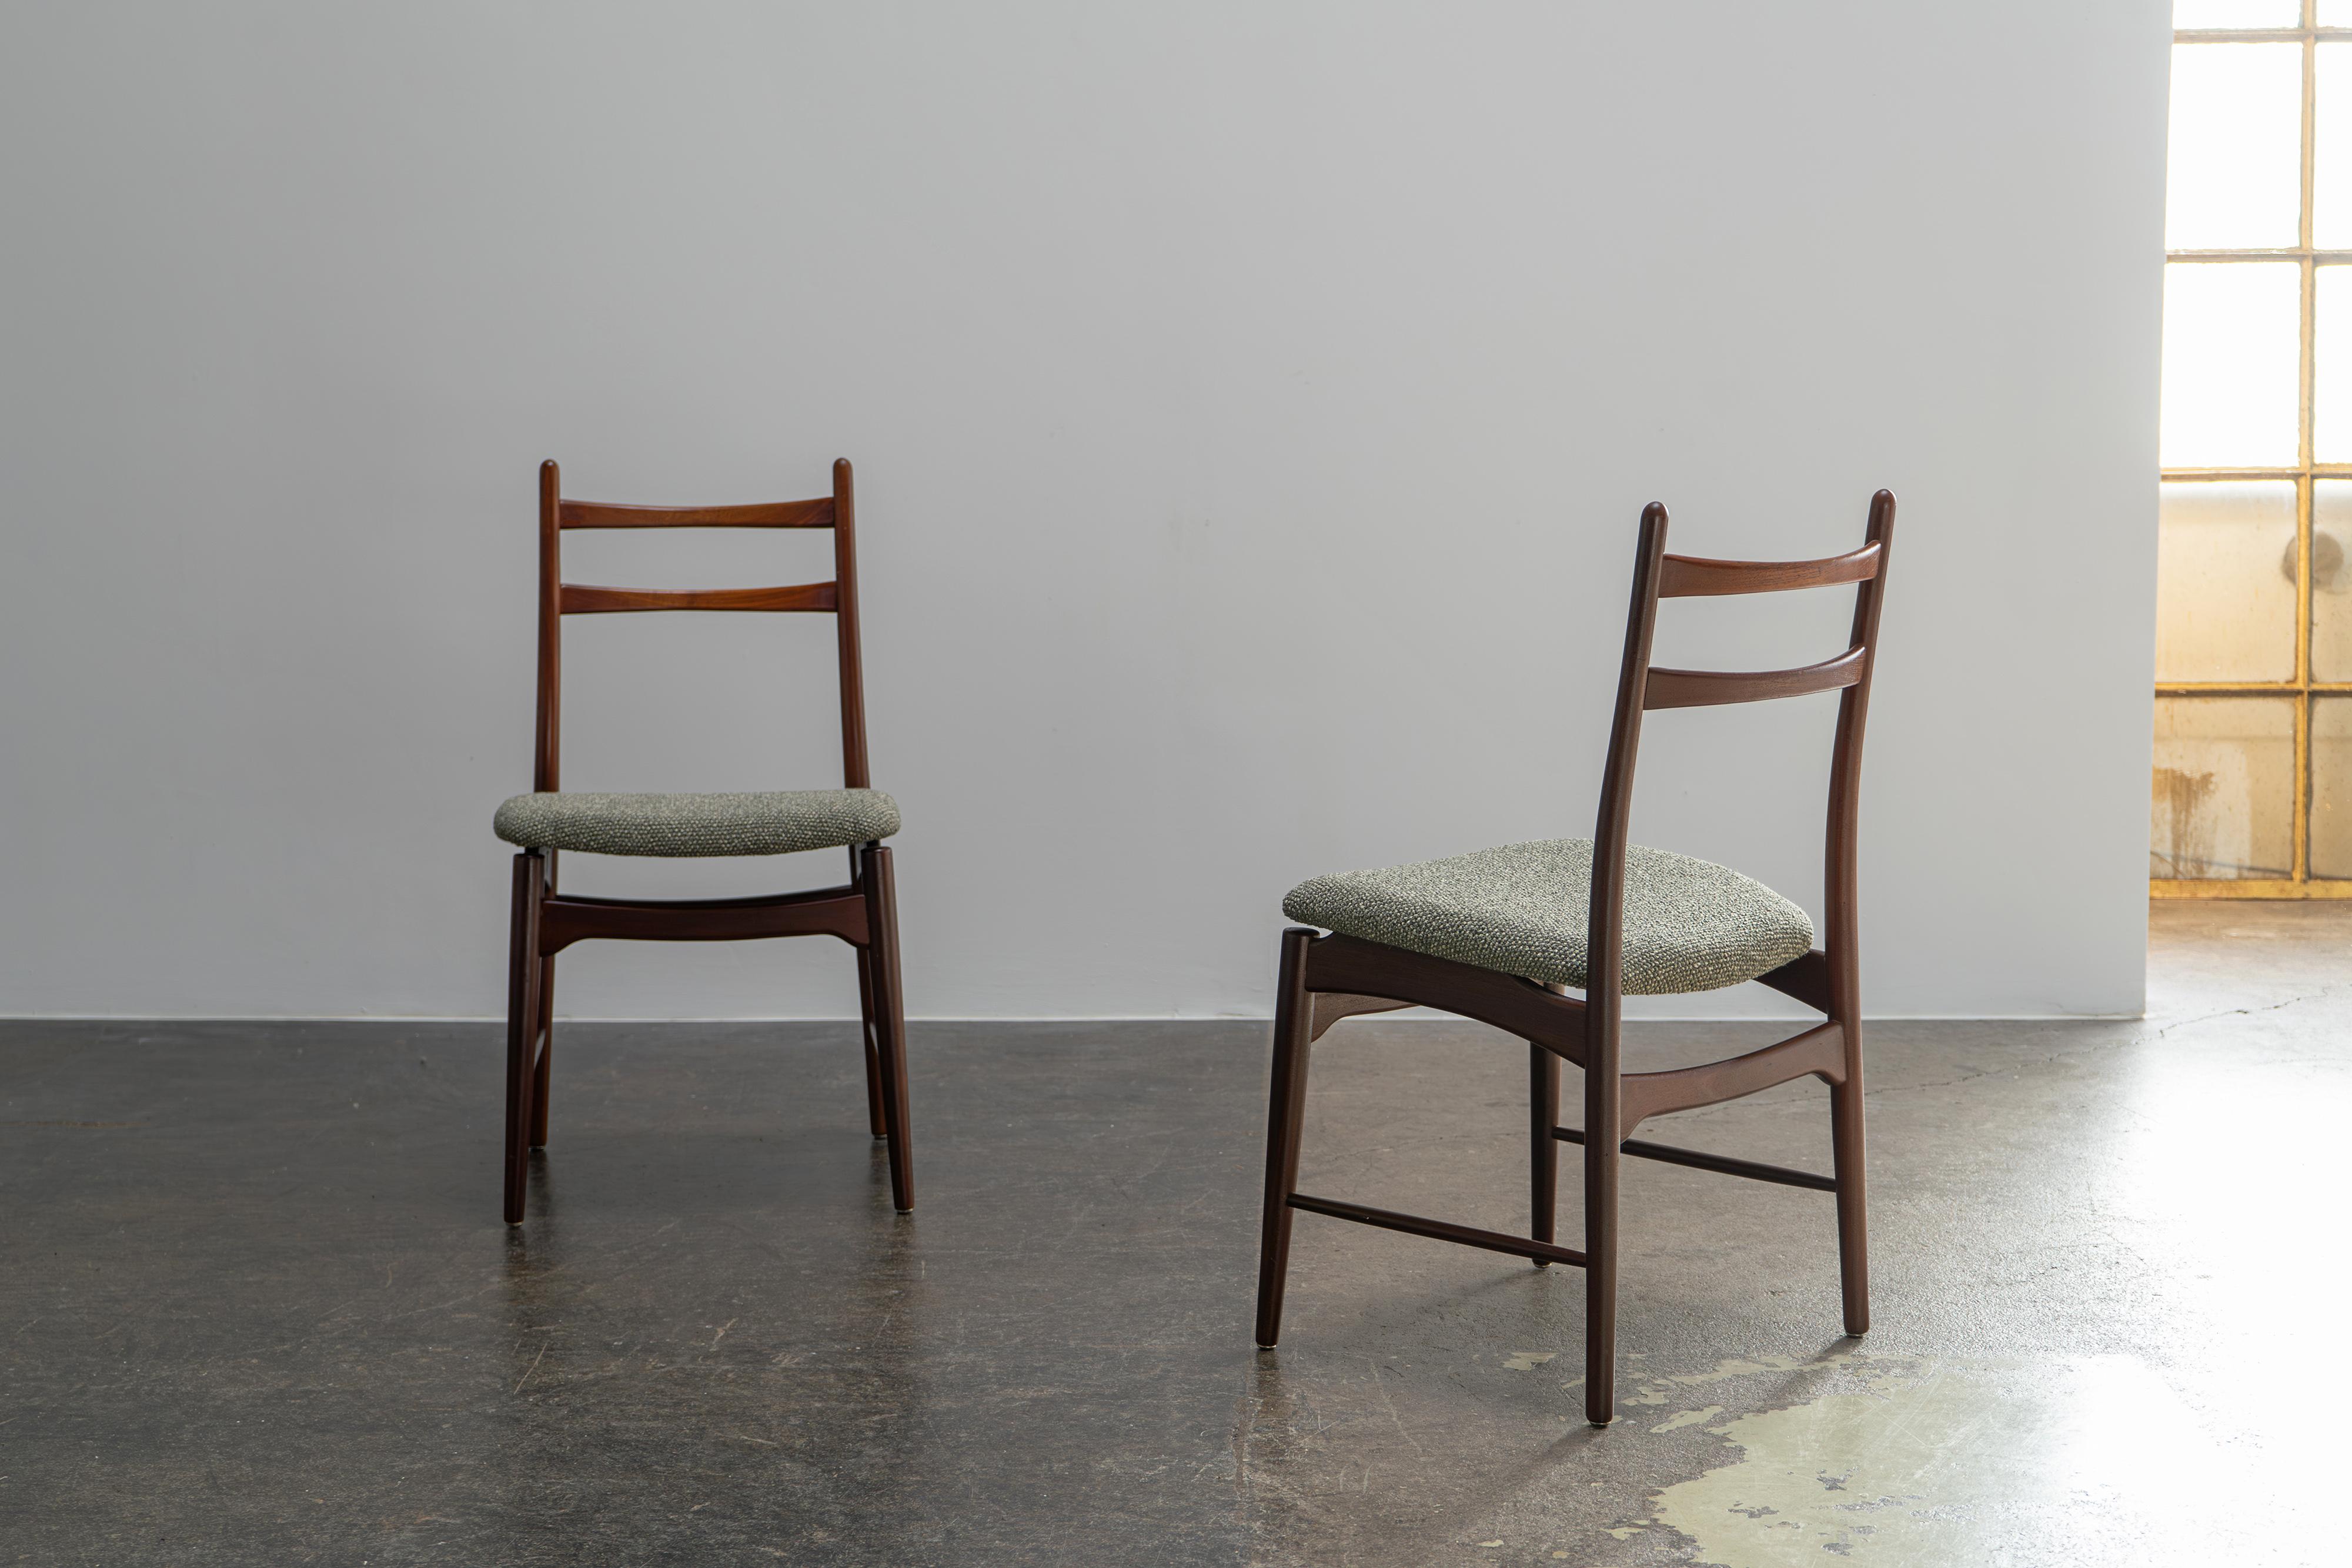 Cotton Set of Twelve Mid-Century Teak Dining Chairs by Wilkhahn Germany, 1958 For Sale